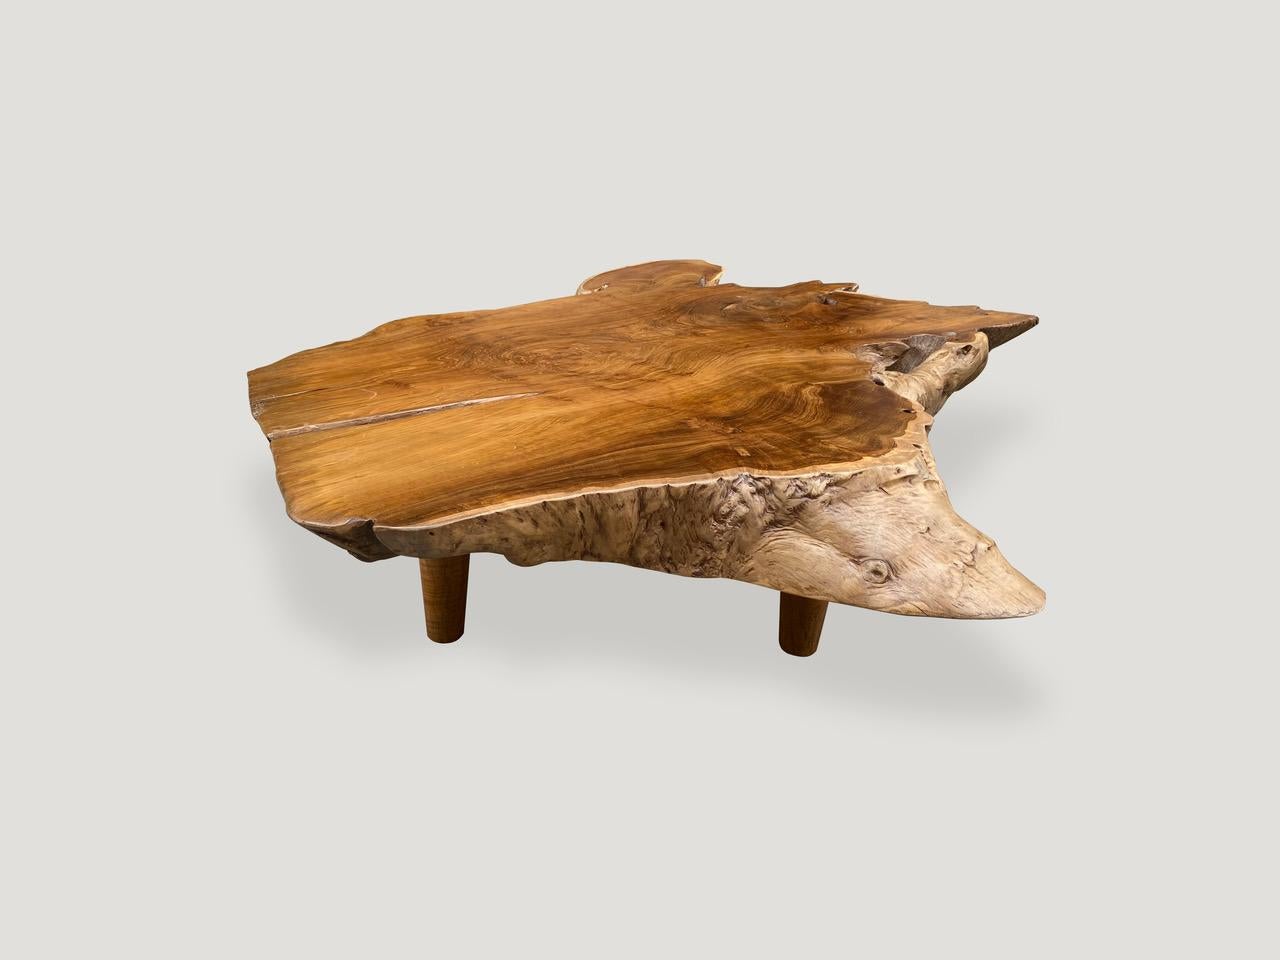 Impressive five inch reclaimed teak wood coffee table with a natural oil polished top. The sides are left natural in contrast. Floating on mid century style cone legs. Organic with a twist. 

Own an Andrianna Shamaris original.

Andrianna